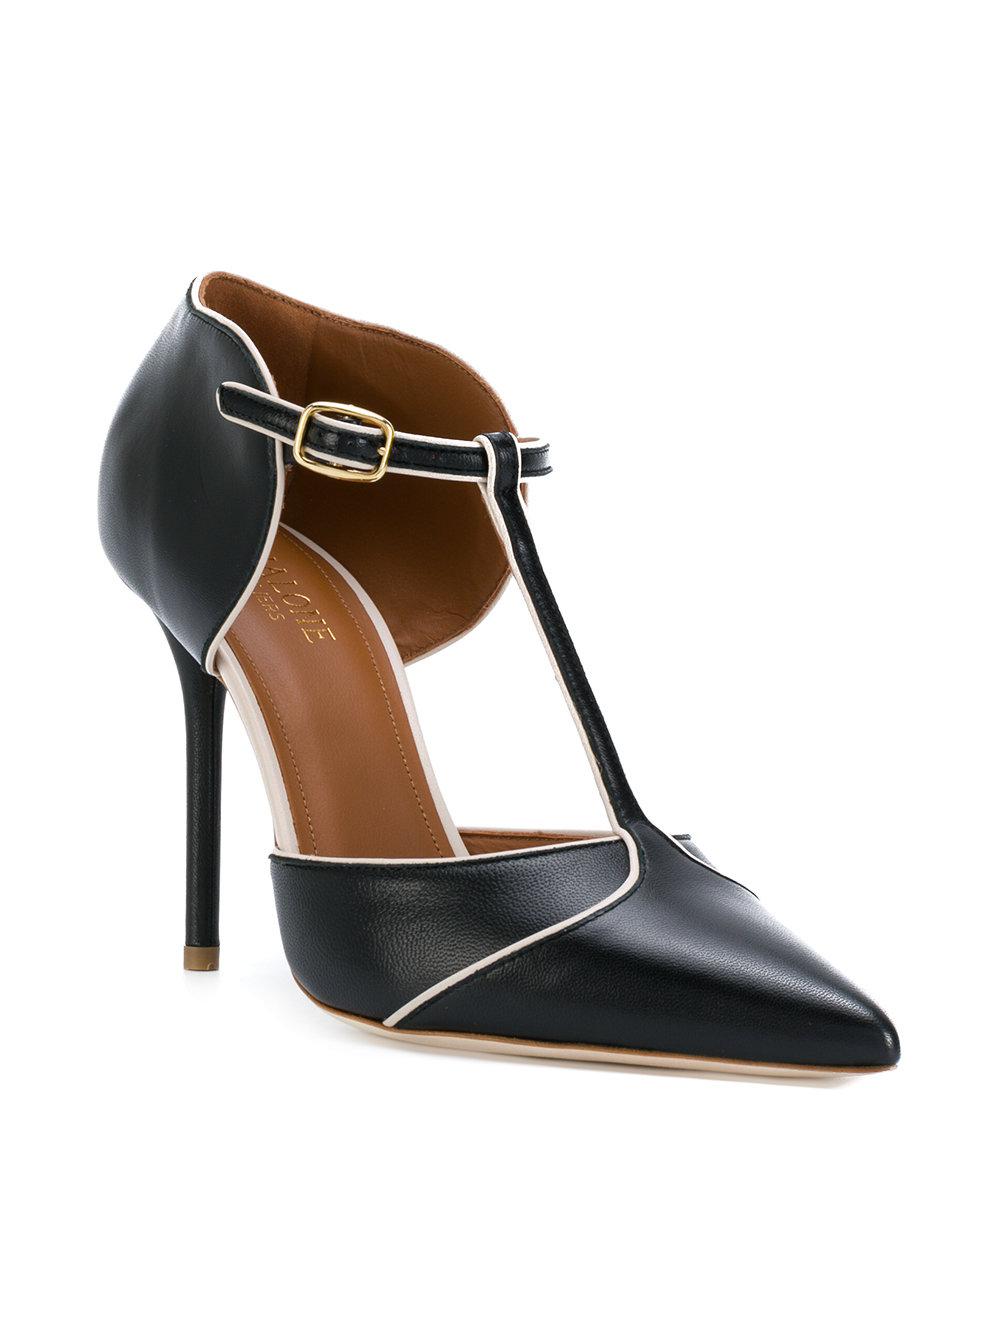 Malone Souliers Leather Sadie T-bar Pumps in Black - Lyst